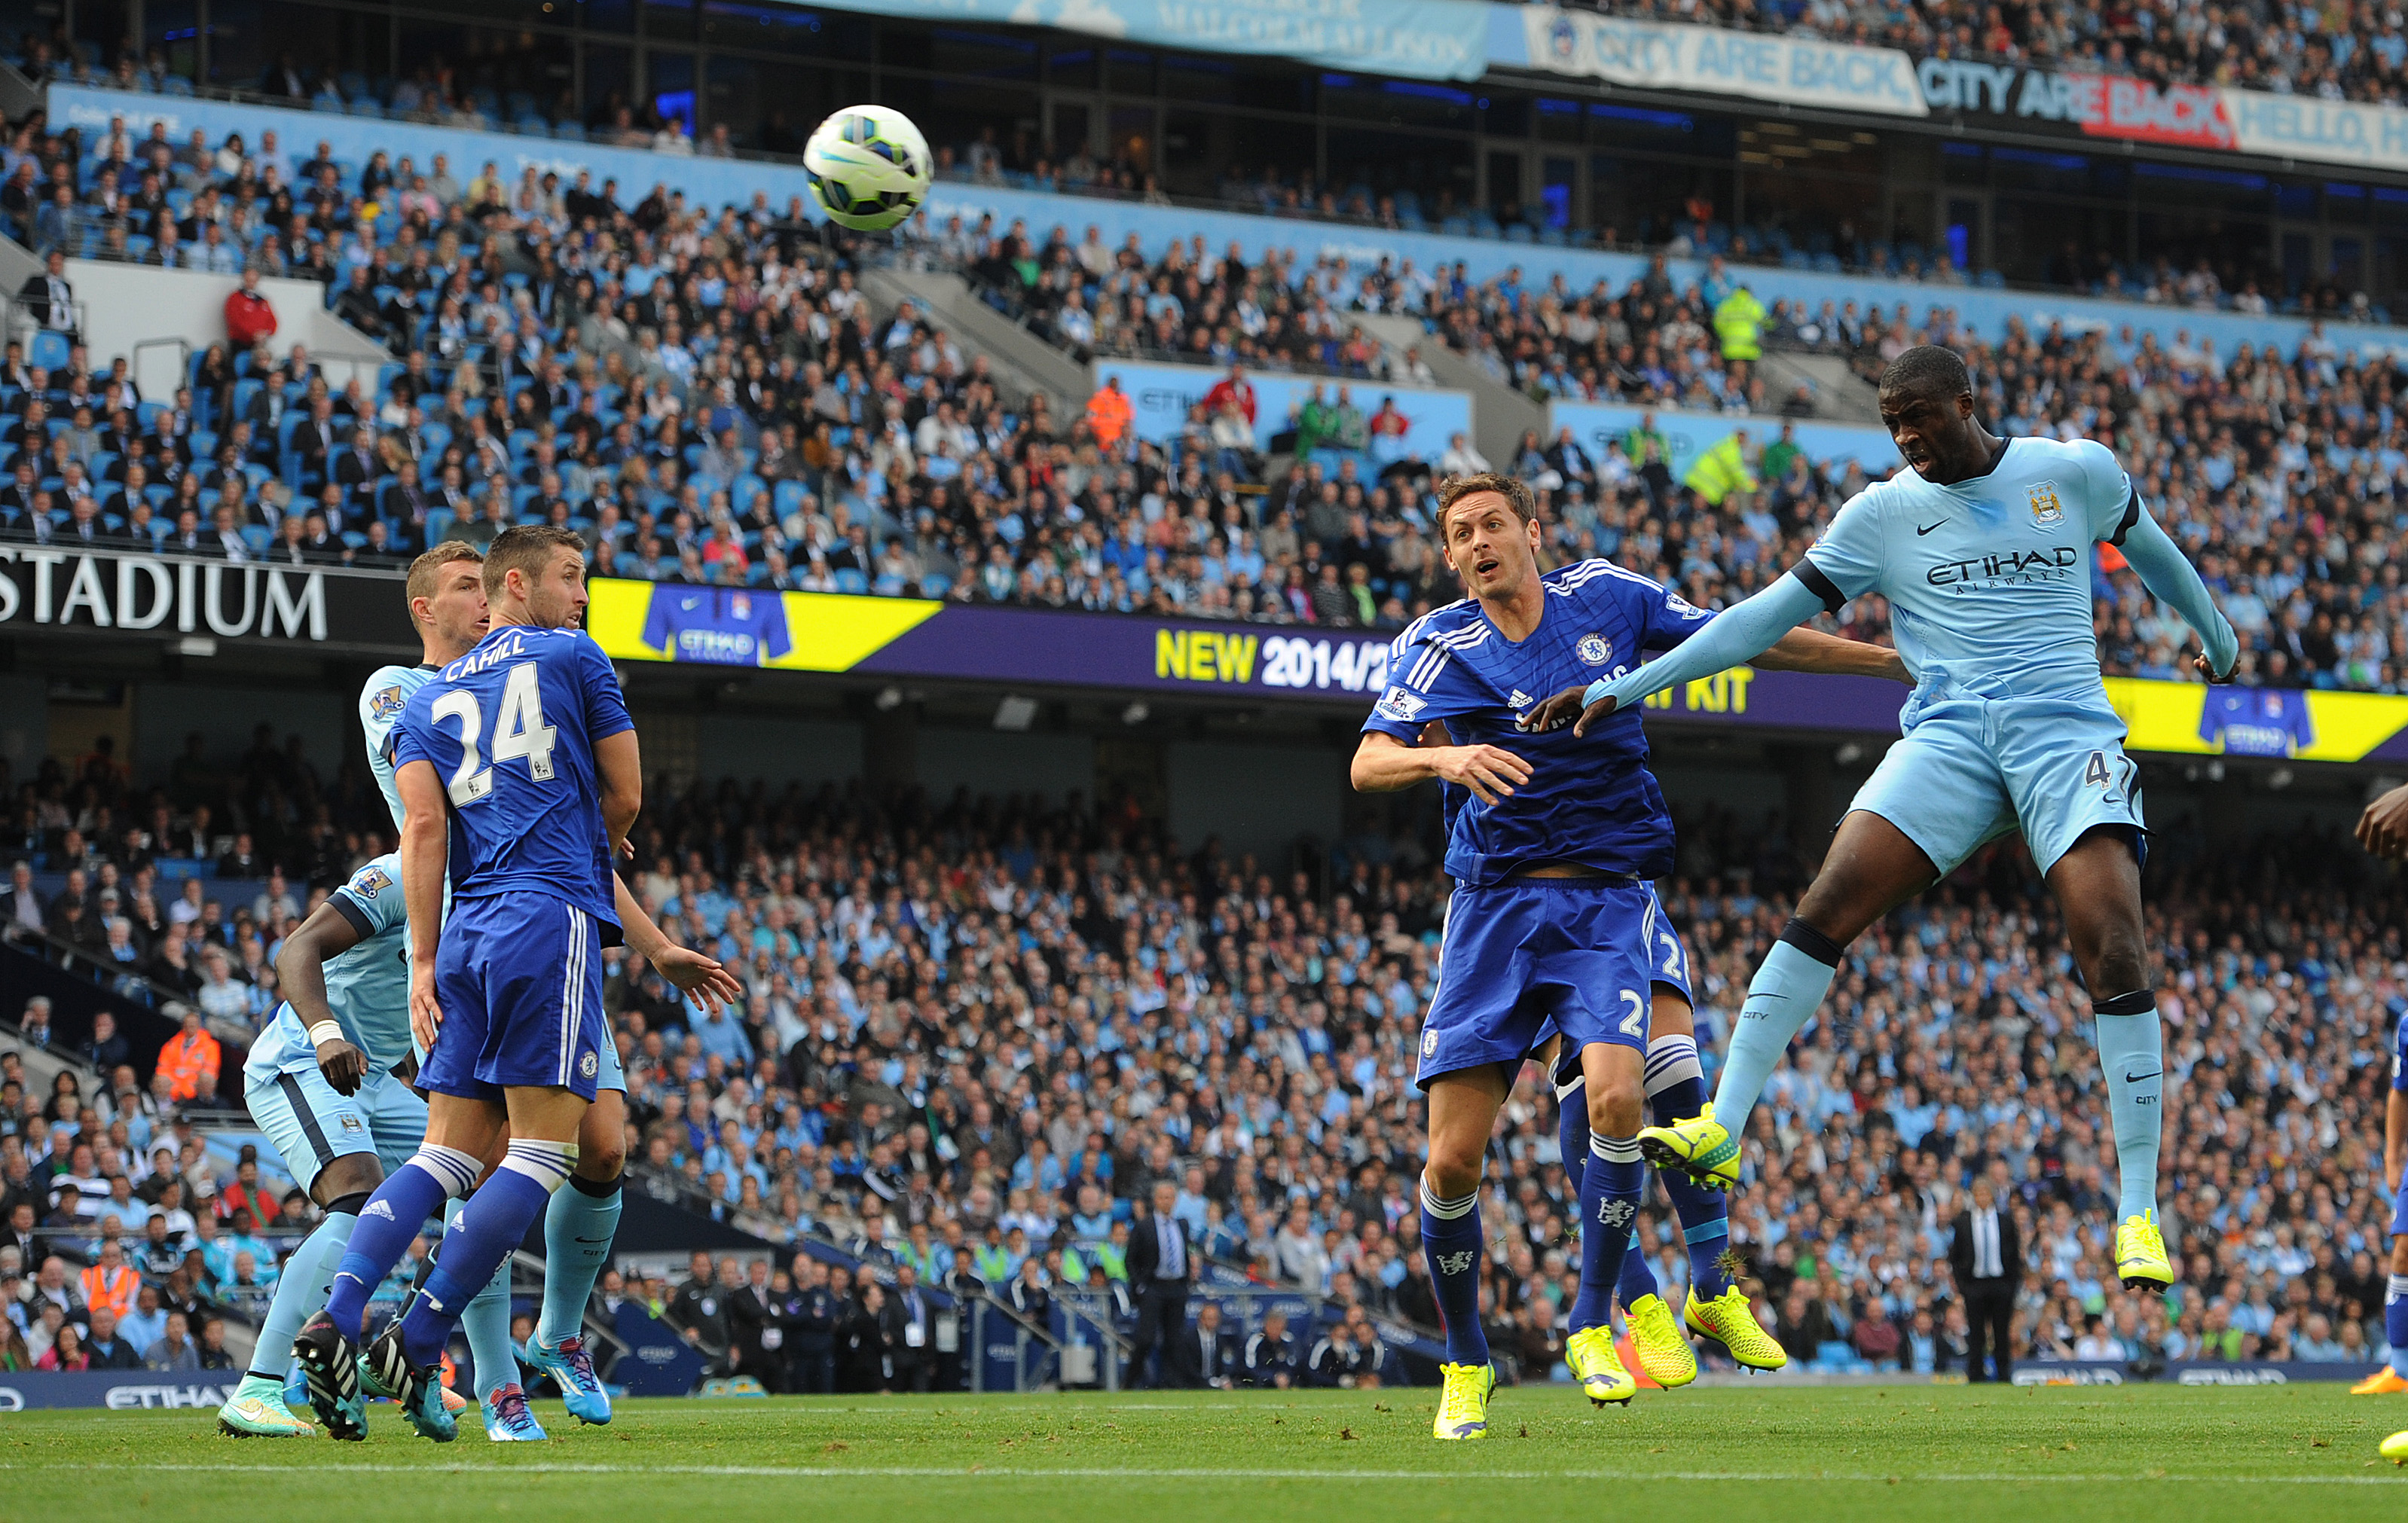 epa04410961 Chelsea's Nemanja Matic (C ) in action with Manchester City's Yaya Toure (R) during the English Premier League soccer match between Manchester City and Chelsea at the Etihad stadium in Manchester, Britain, 21 September 2014.  EPA/PETER POWELL DataCo terms and conditions apply 
http://www.epa.eu/files/Terms%20and%20Conditions/DataCo_Terms_and_Conditions.pdf